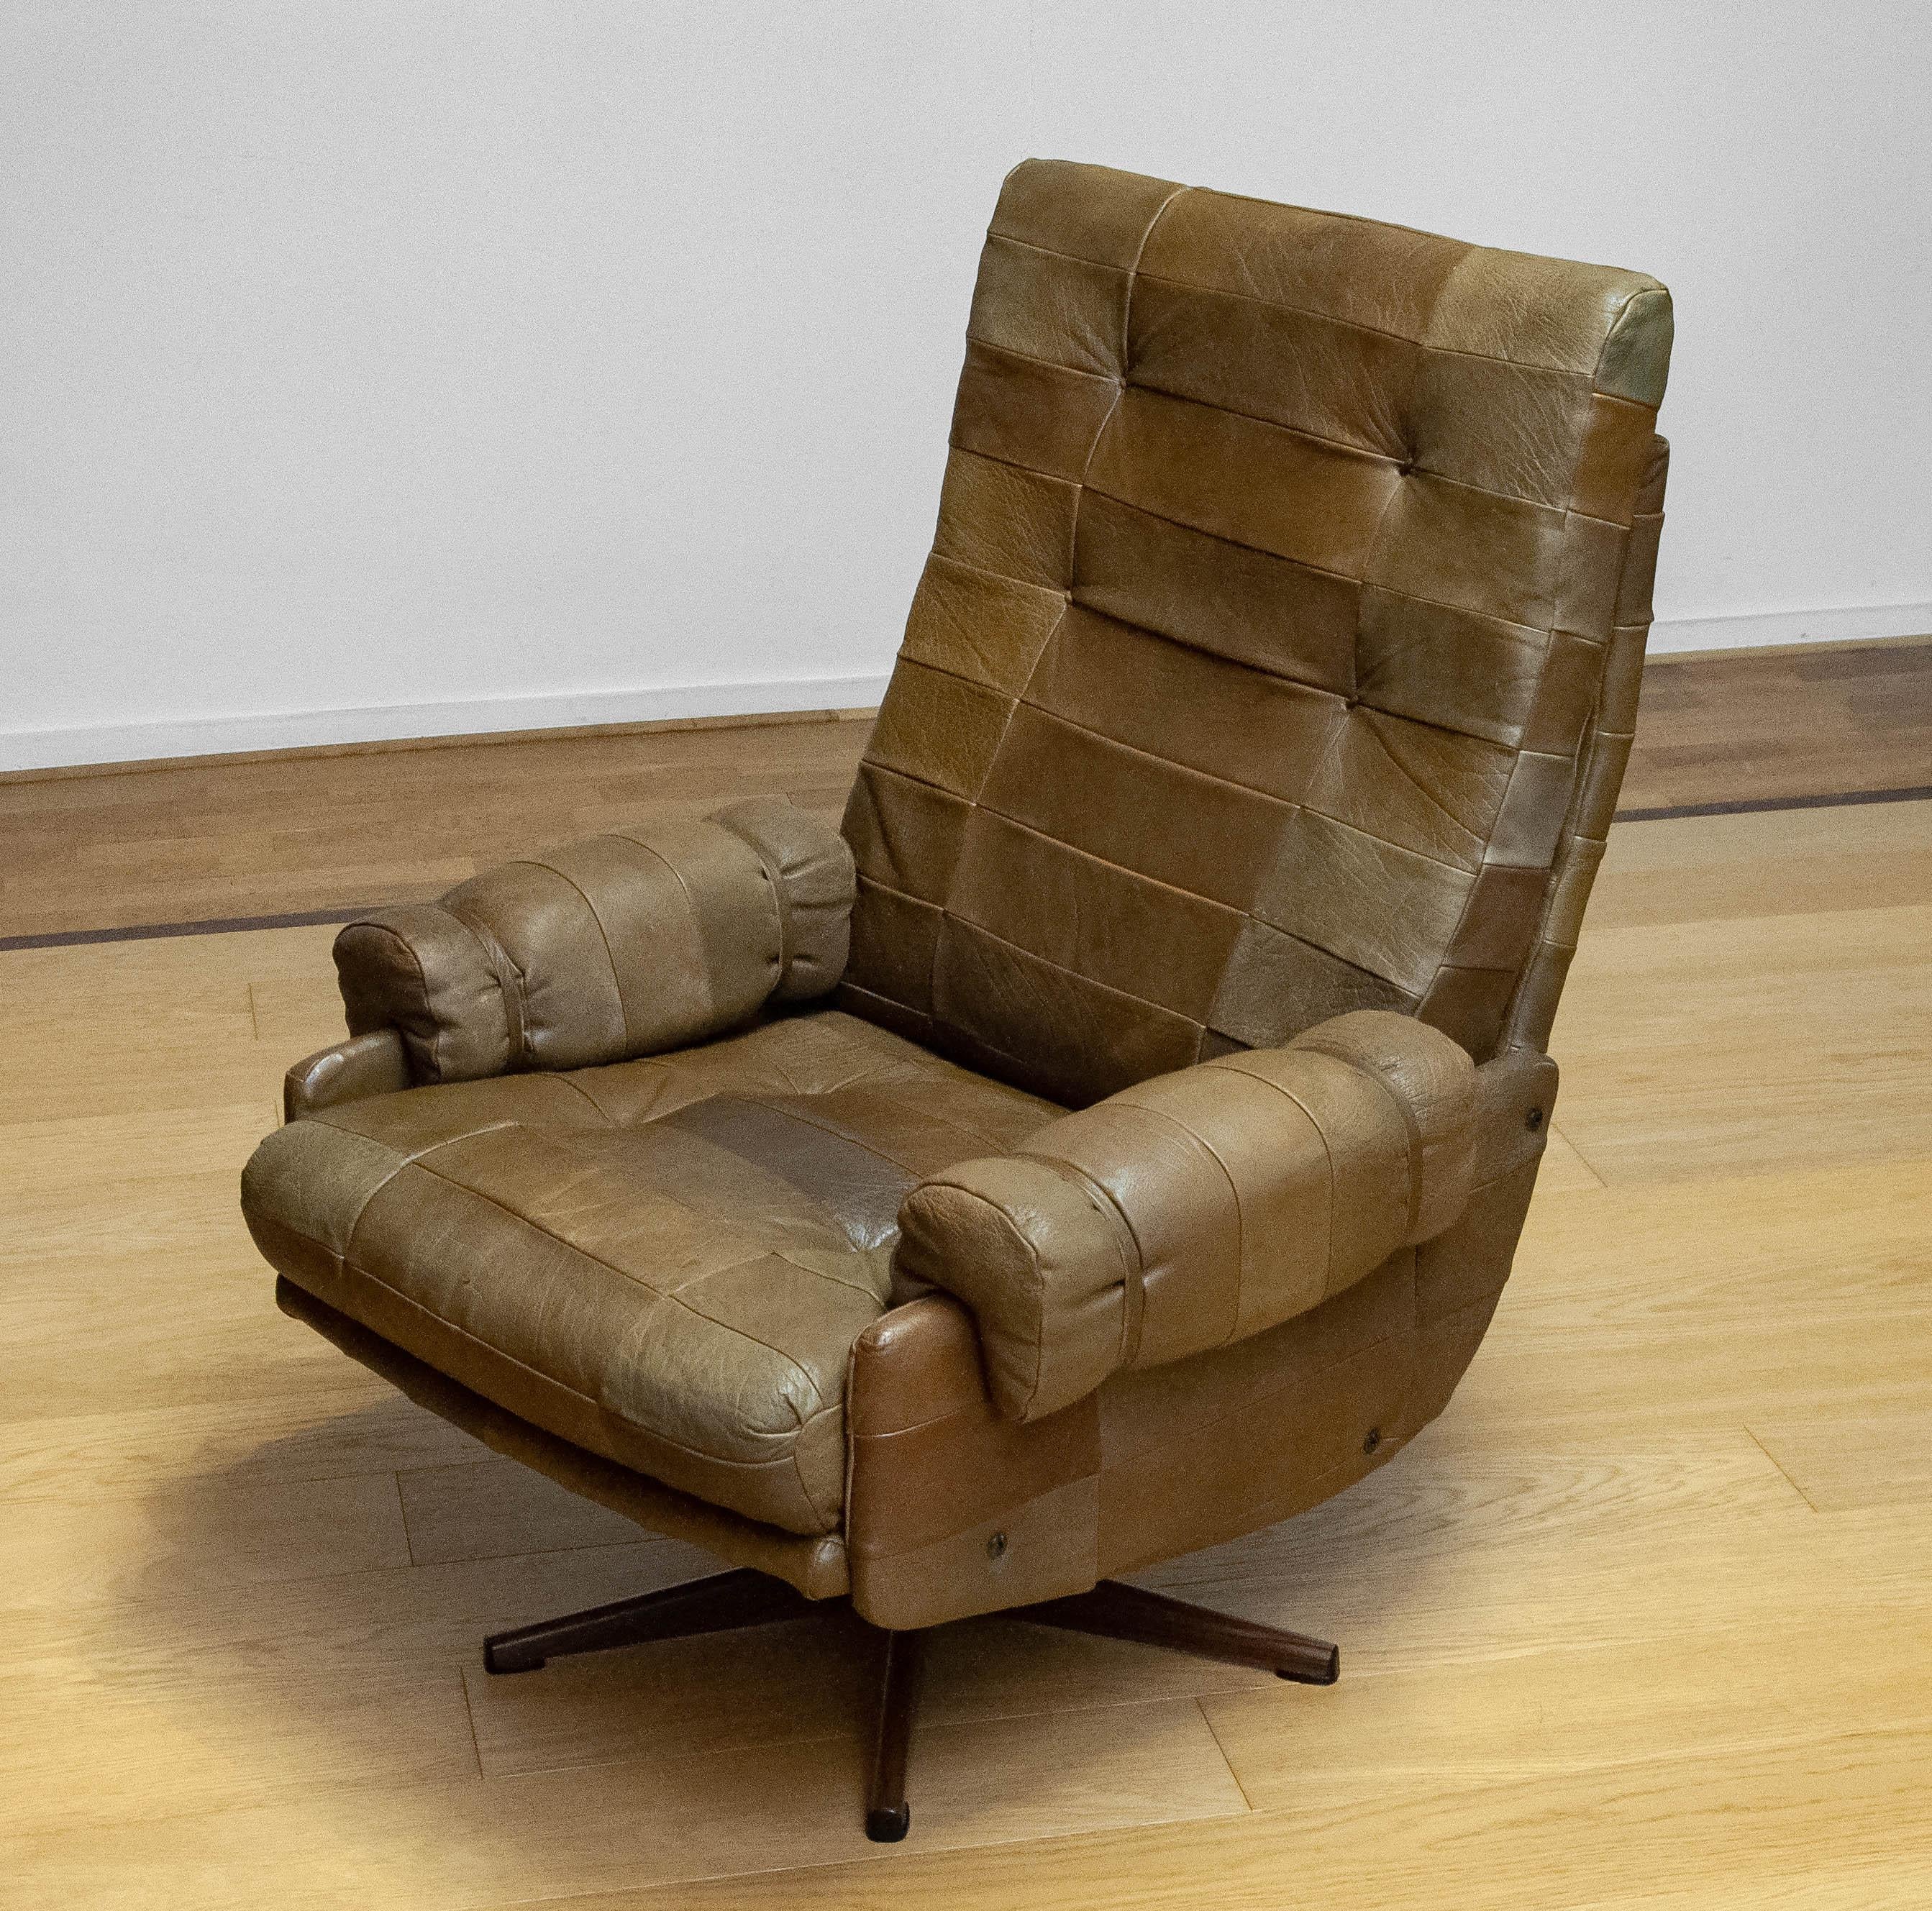 Scandinavian Modern 70s Swivel Chair By Arne Norell Möbel AB In Sturdy Olive Green Patchwork Leather For Sale